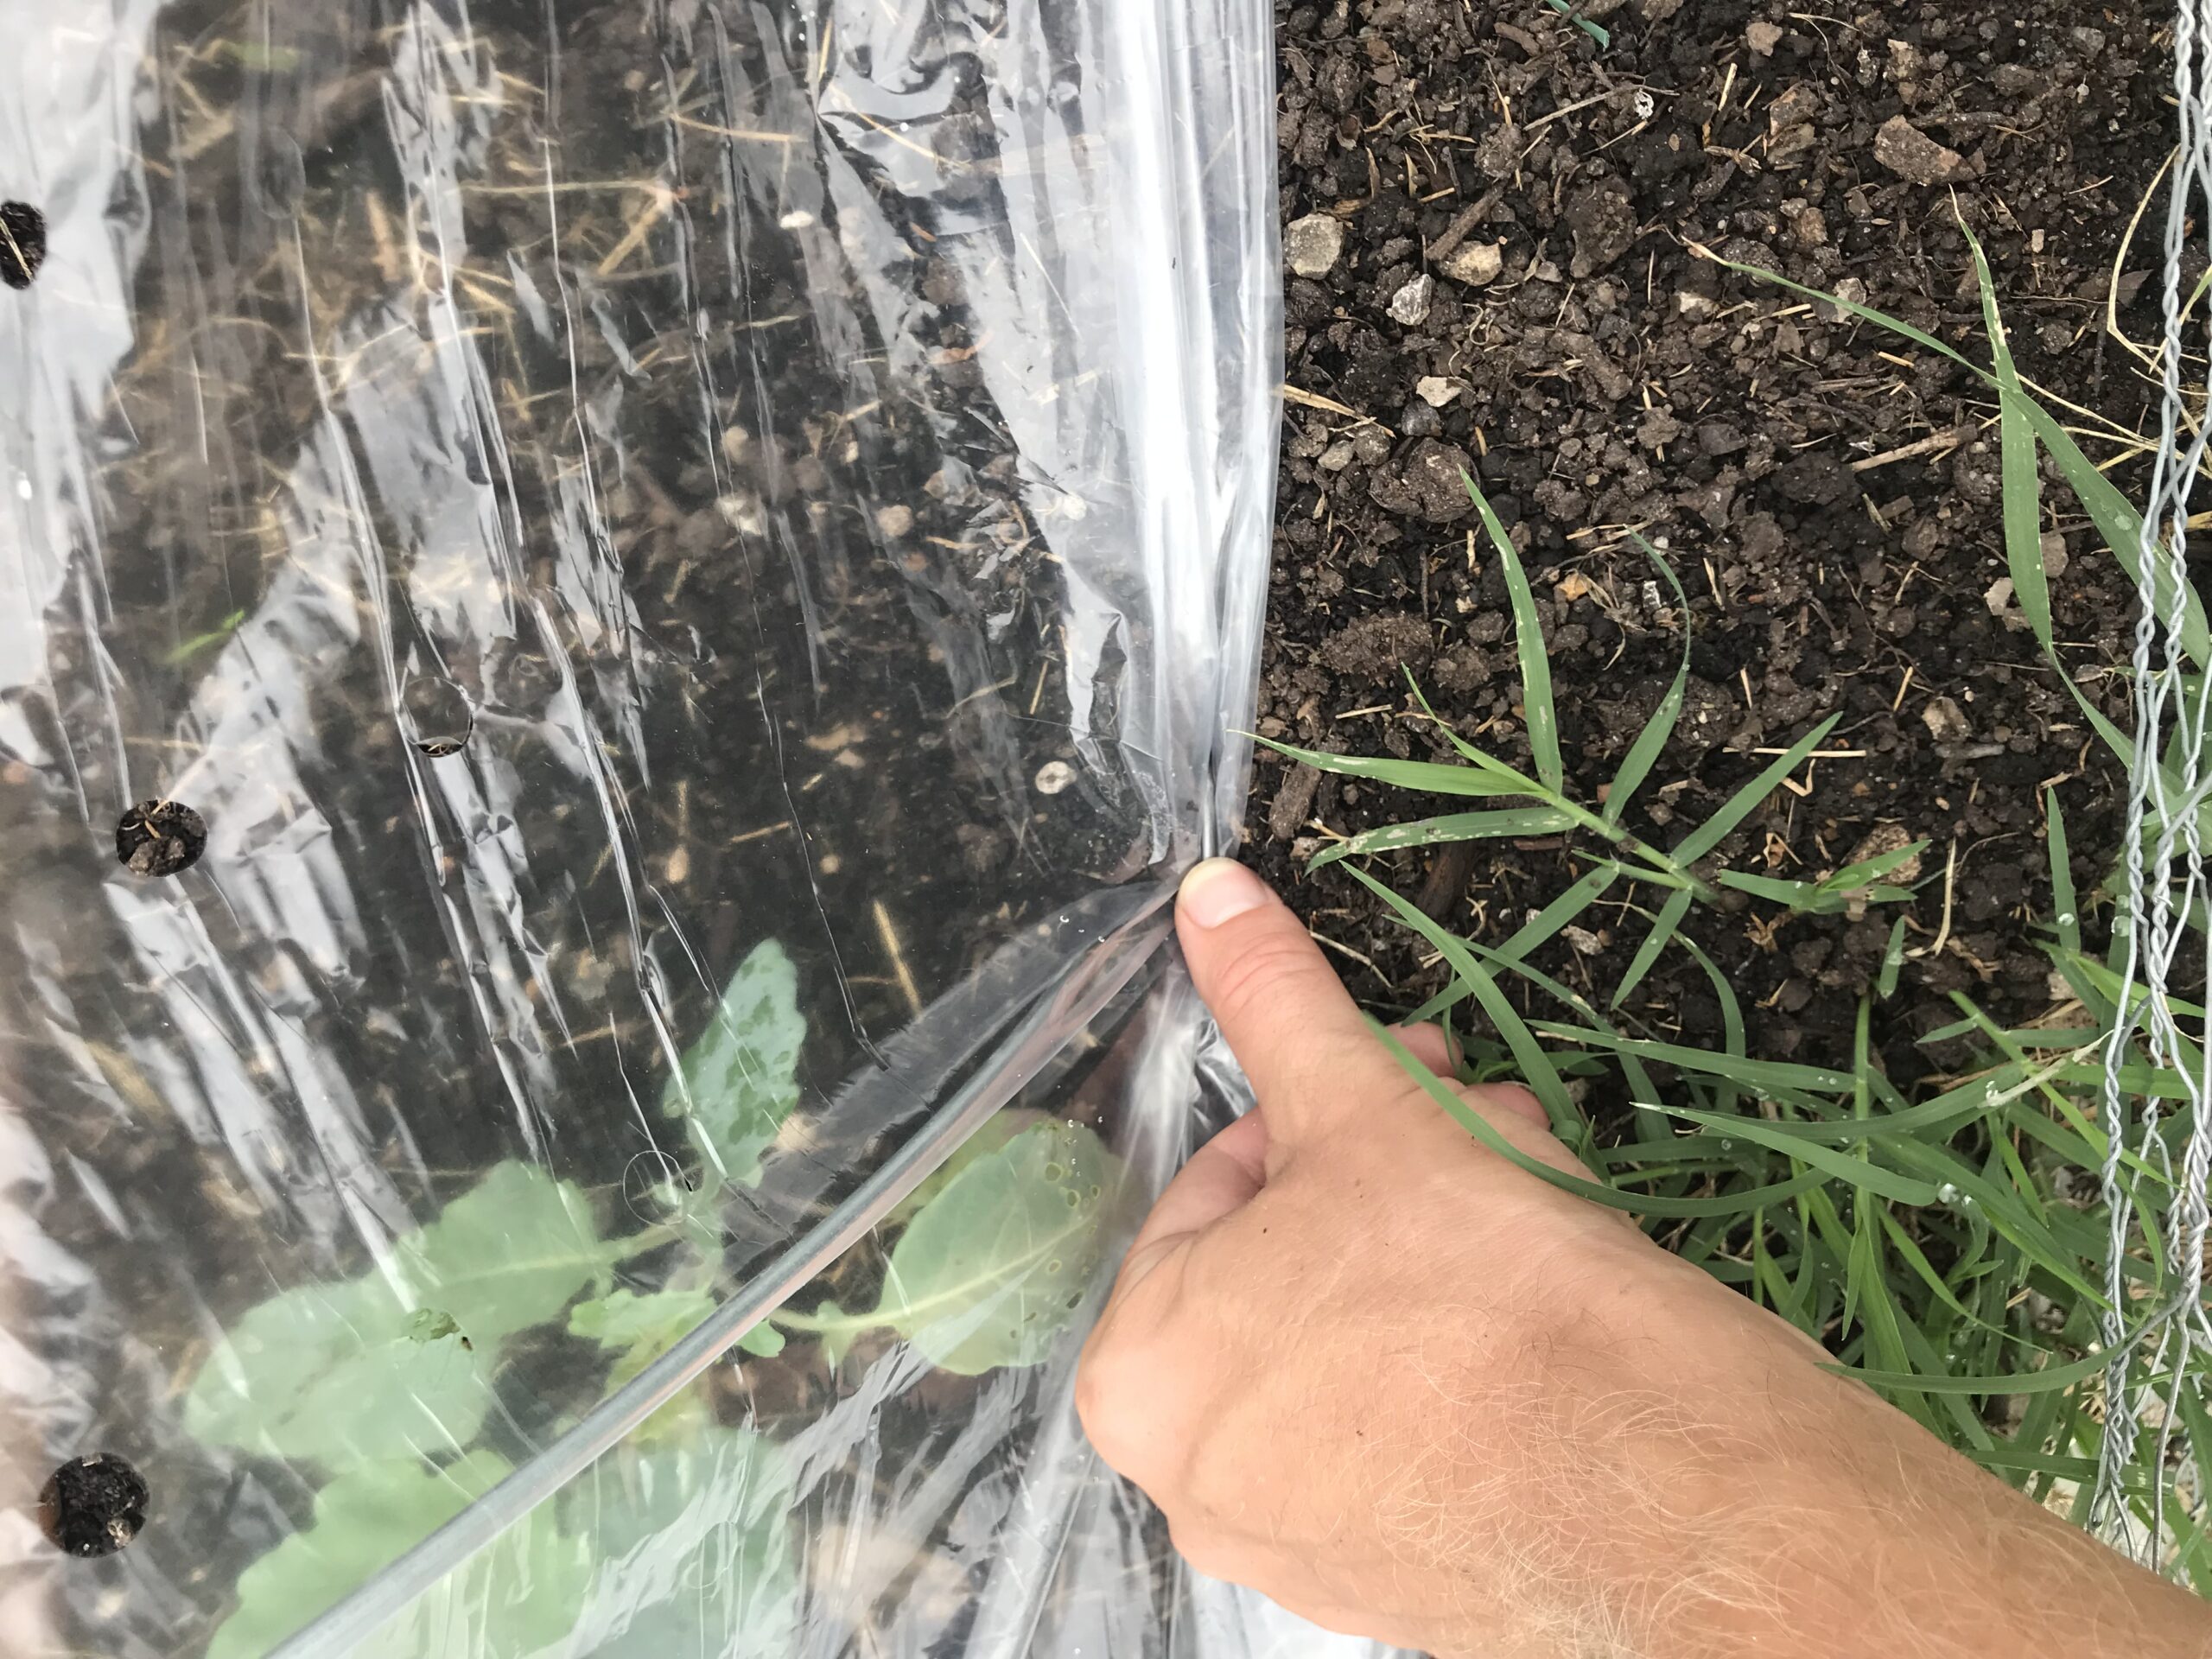 Showing that you want to push the staple all the way into the soil